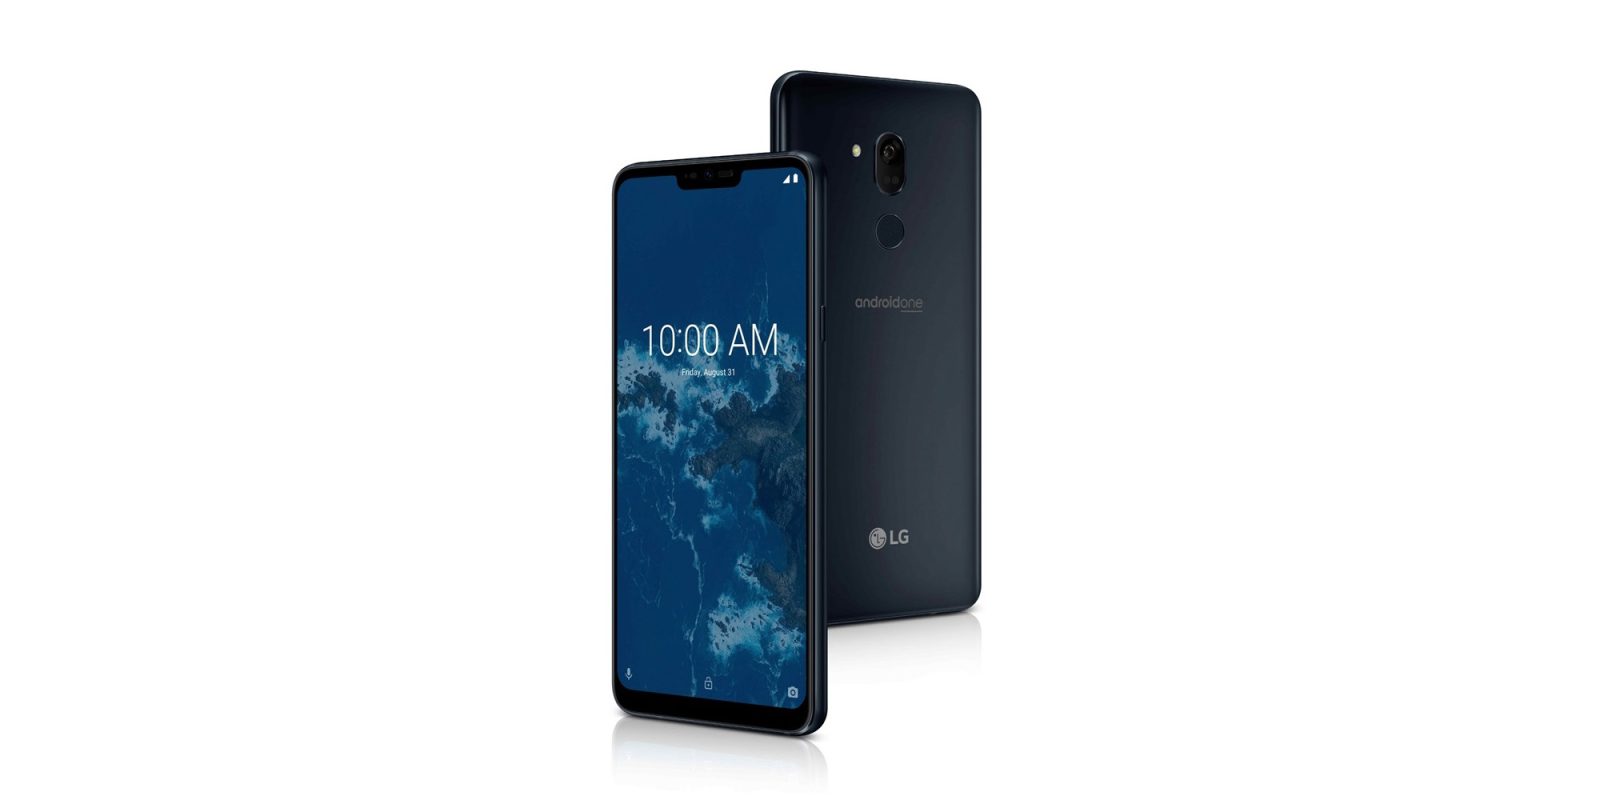 The Low Price of the LG G7 One